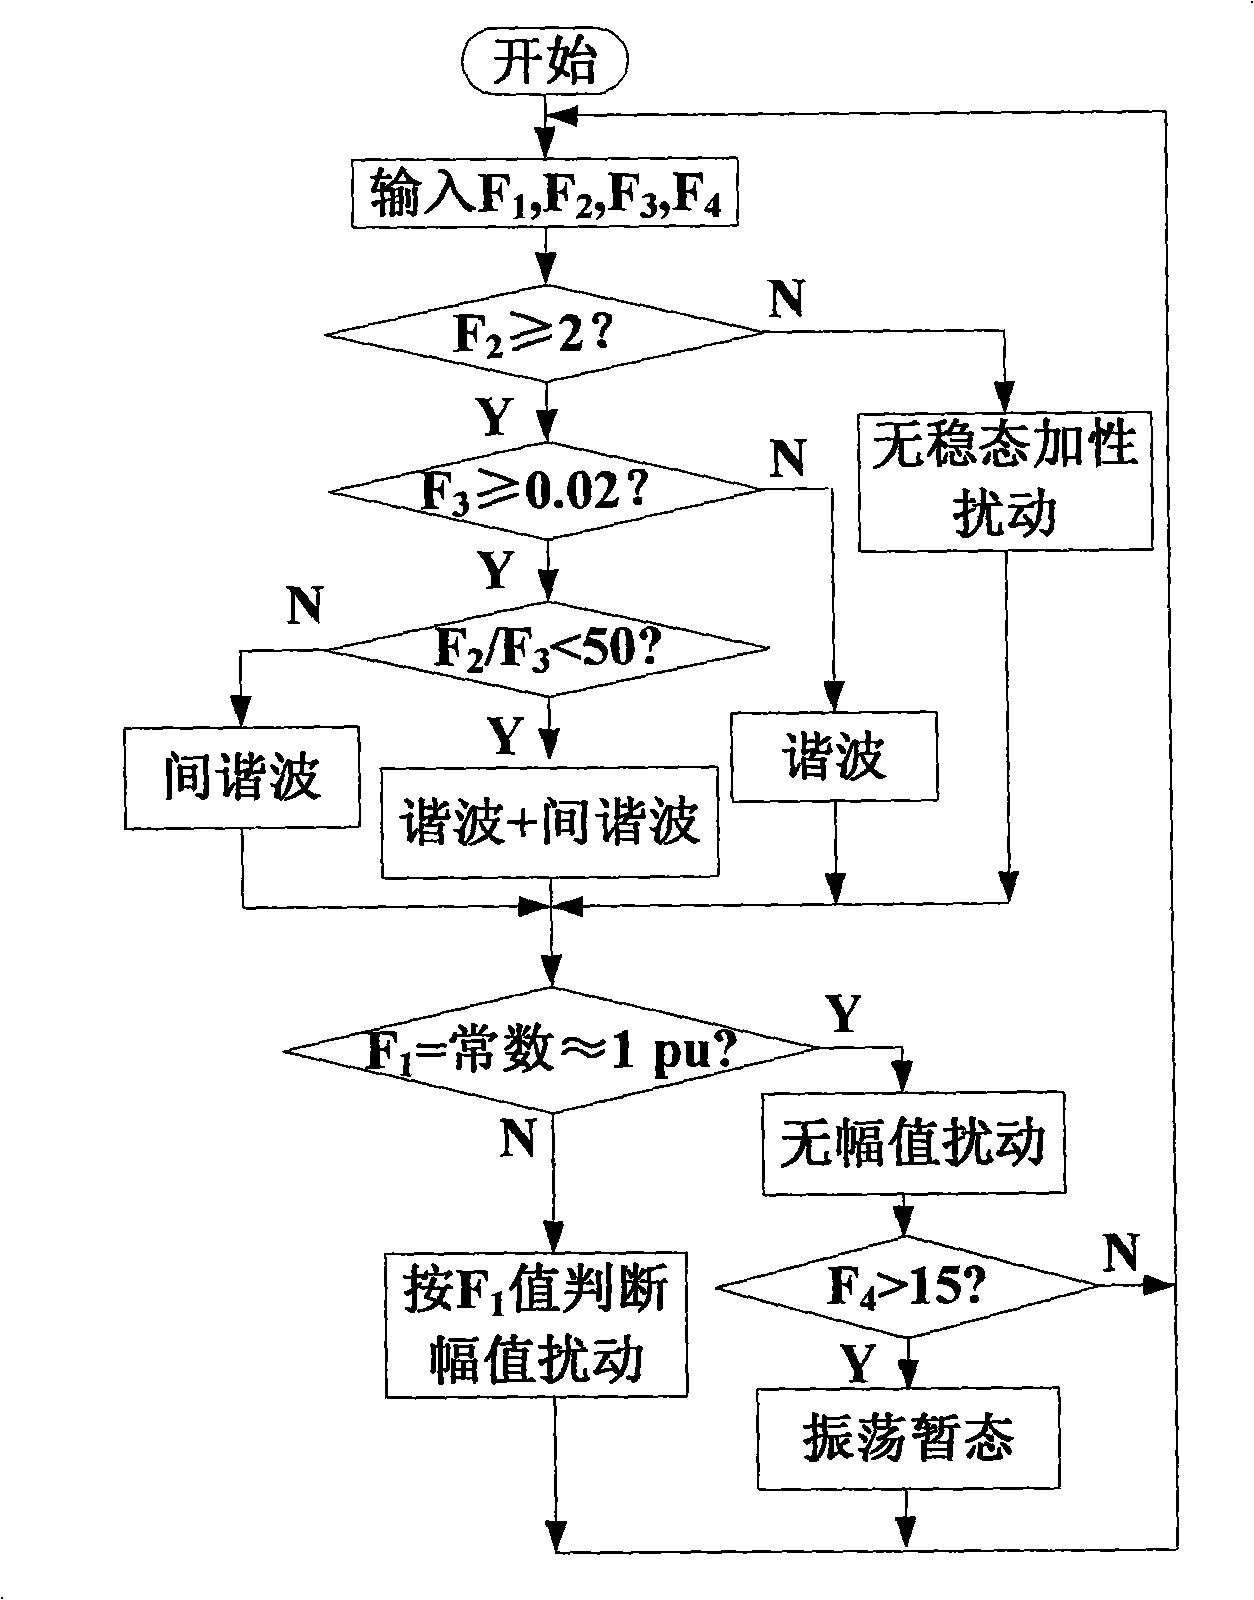 Voltage quality monitoring and perturb automatic classification method based on analysis in time-domain